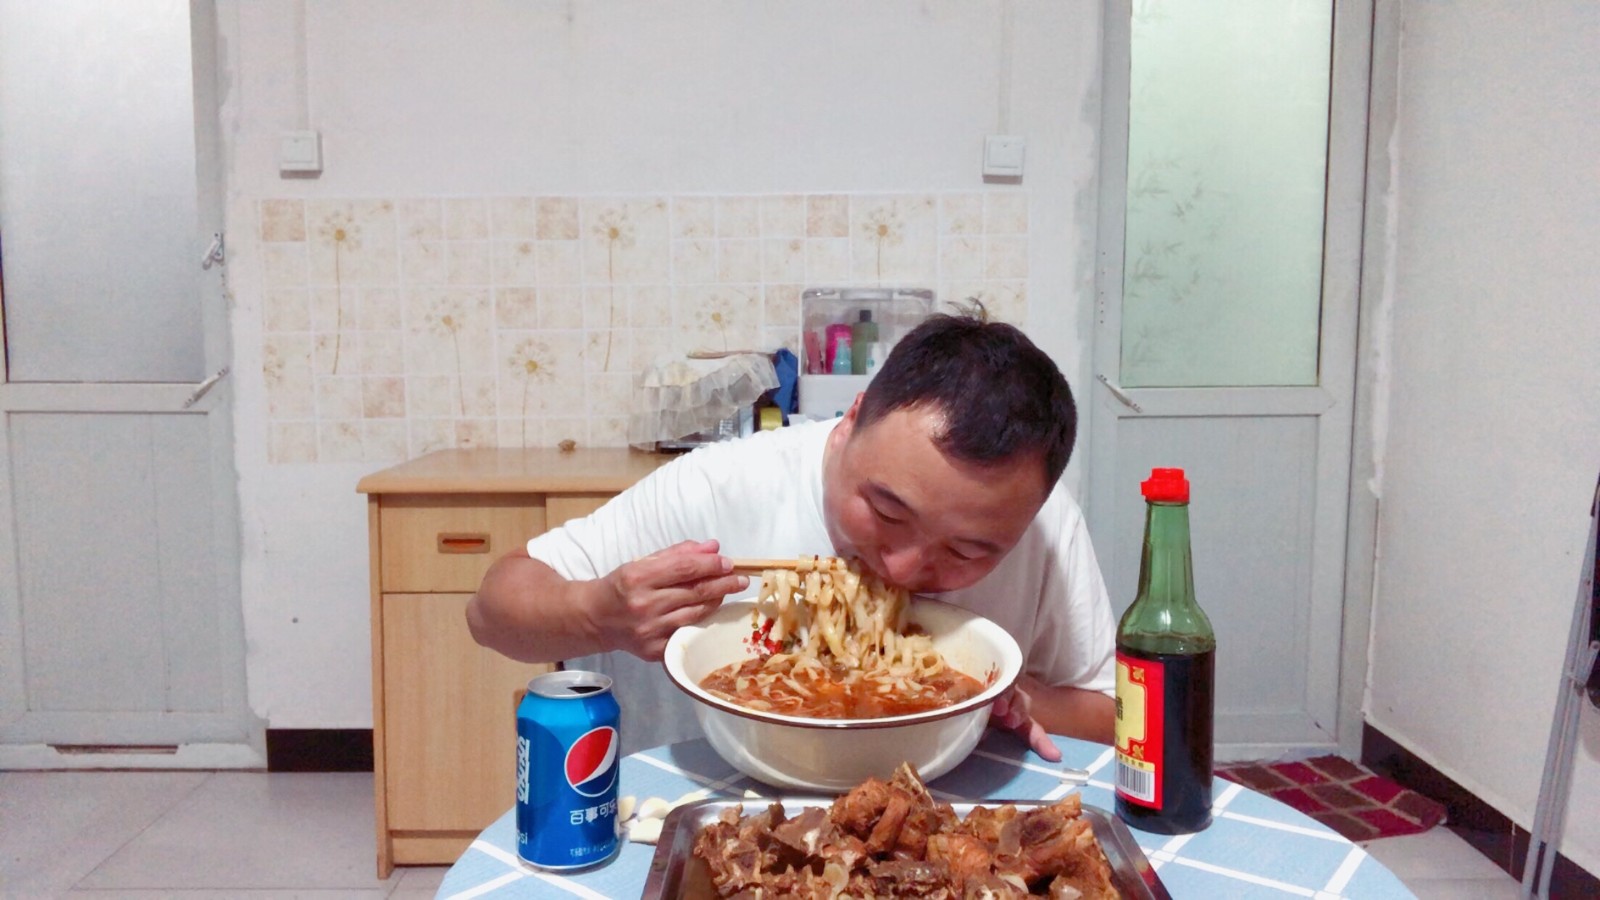 Halogen 2 kg beef 2 kg spine, braised beef knife noodles, too delicious, one pot at a time, addiction!